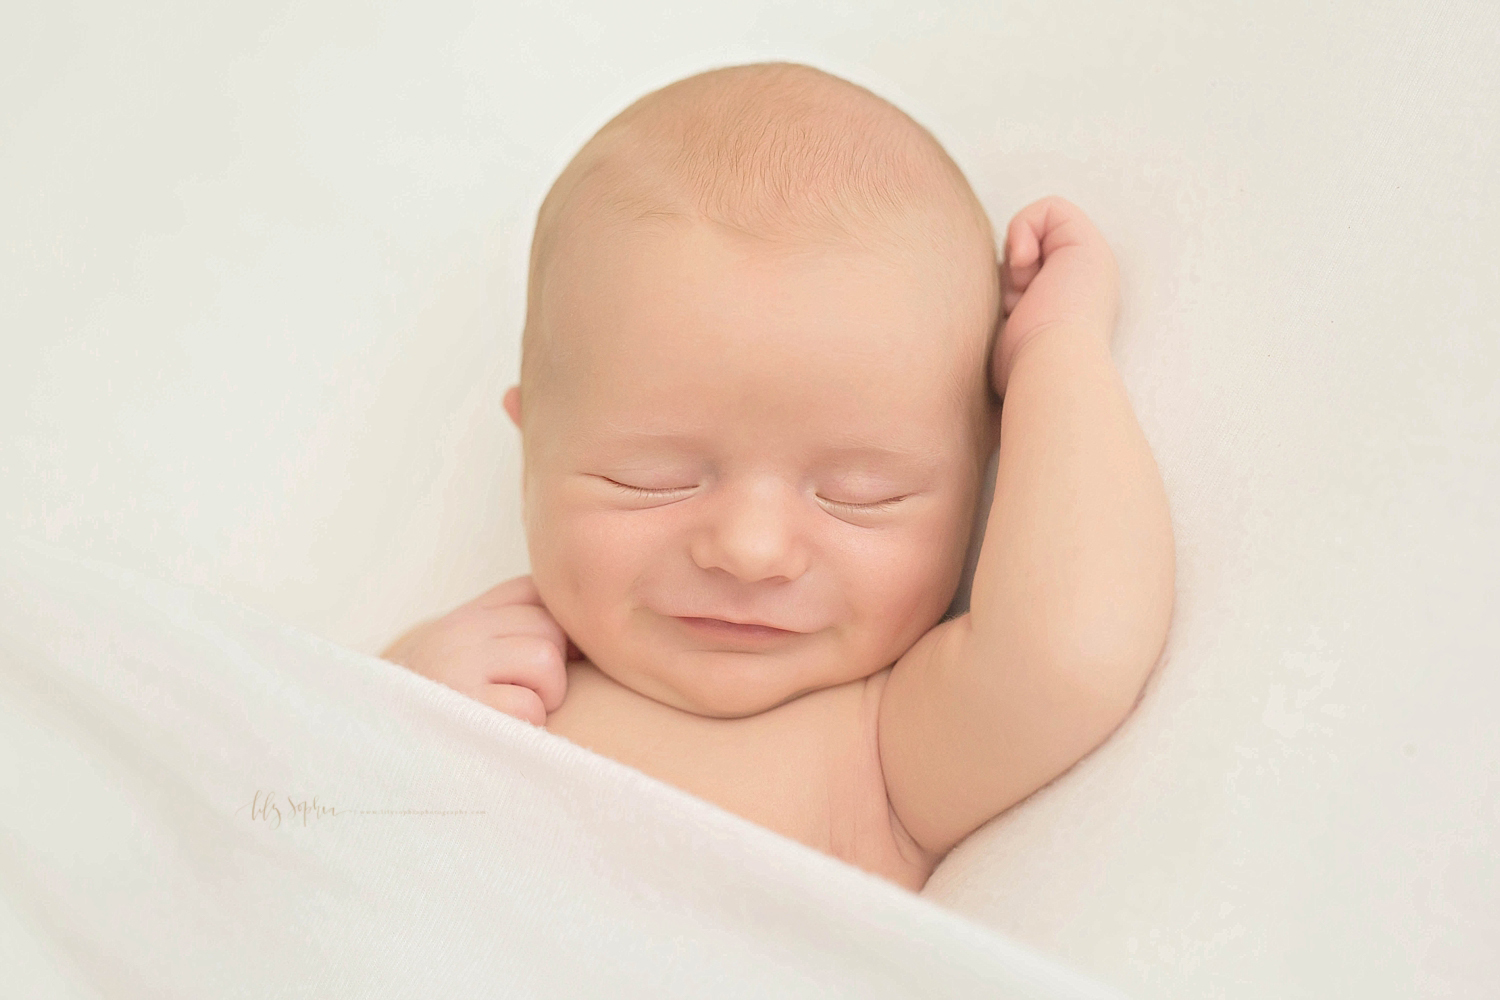  Newborn baby boy with red hair grinning as he sleeps on his back with his right hand reaching above his head.  He is lying between a white blanket. 